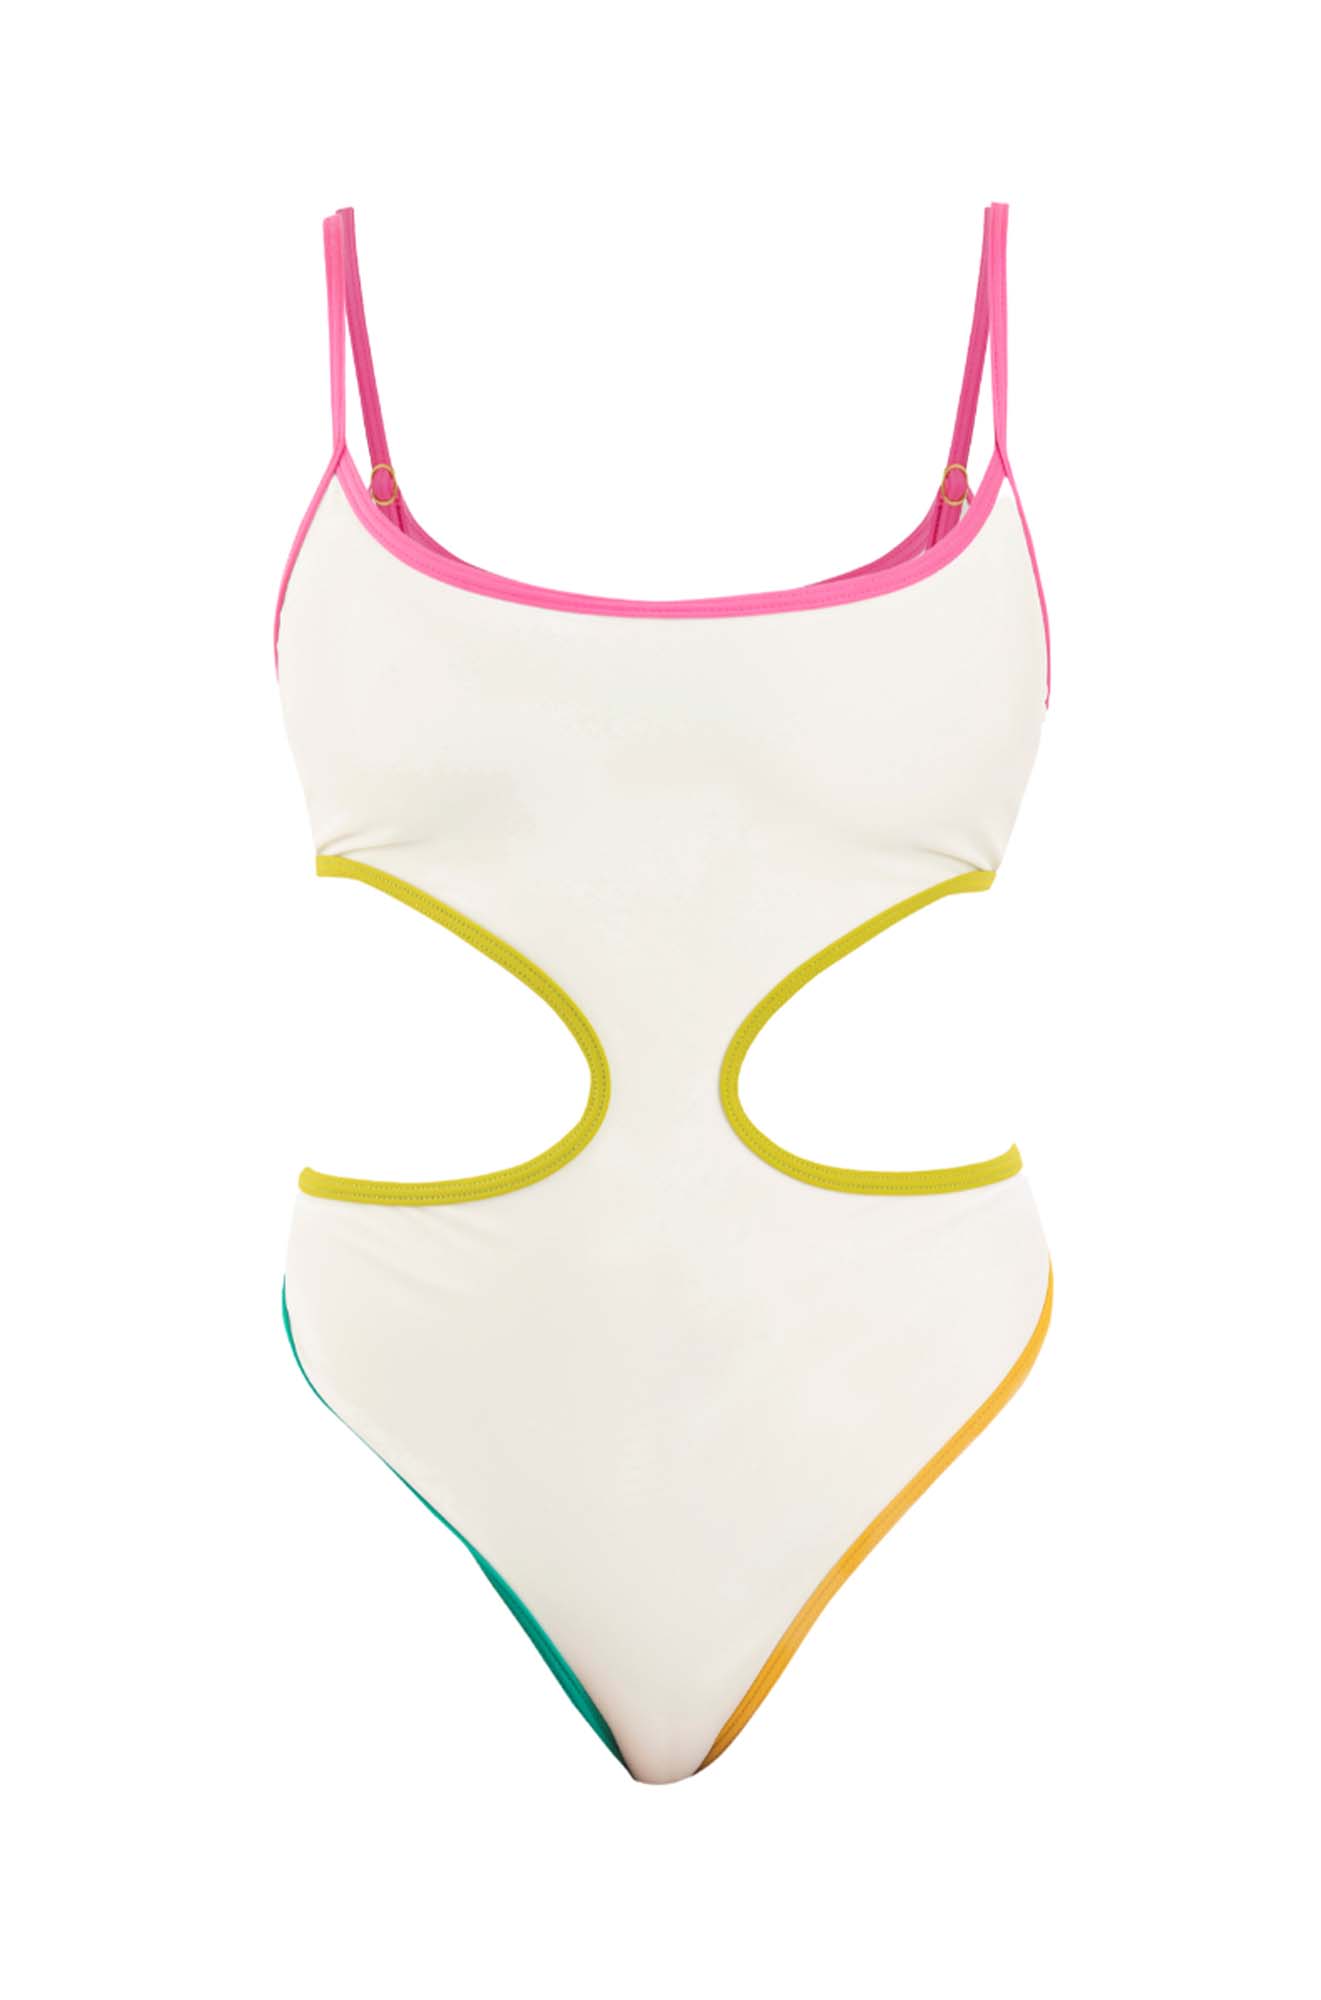 The White Cutout One Piece